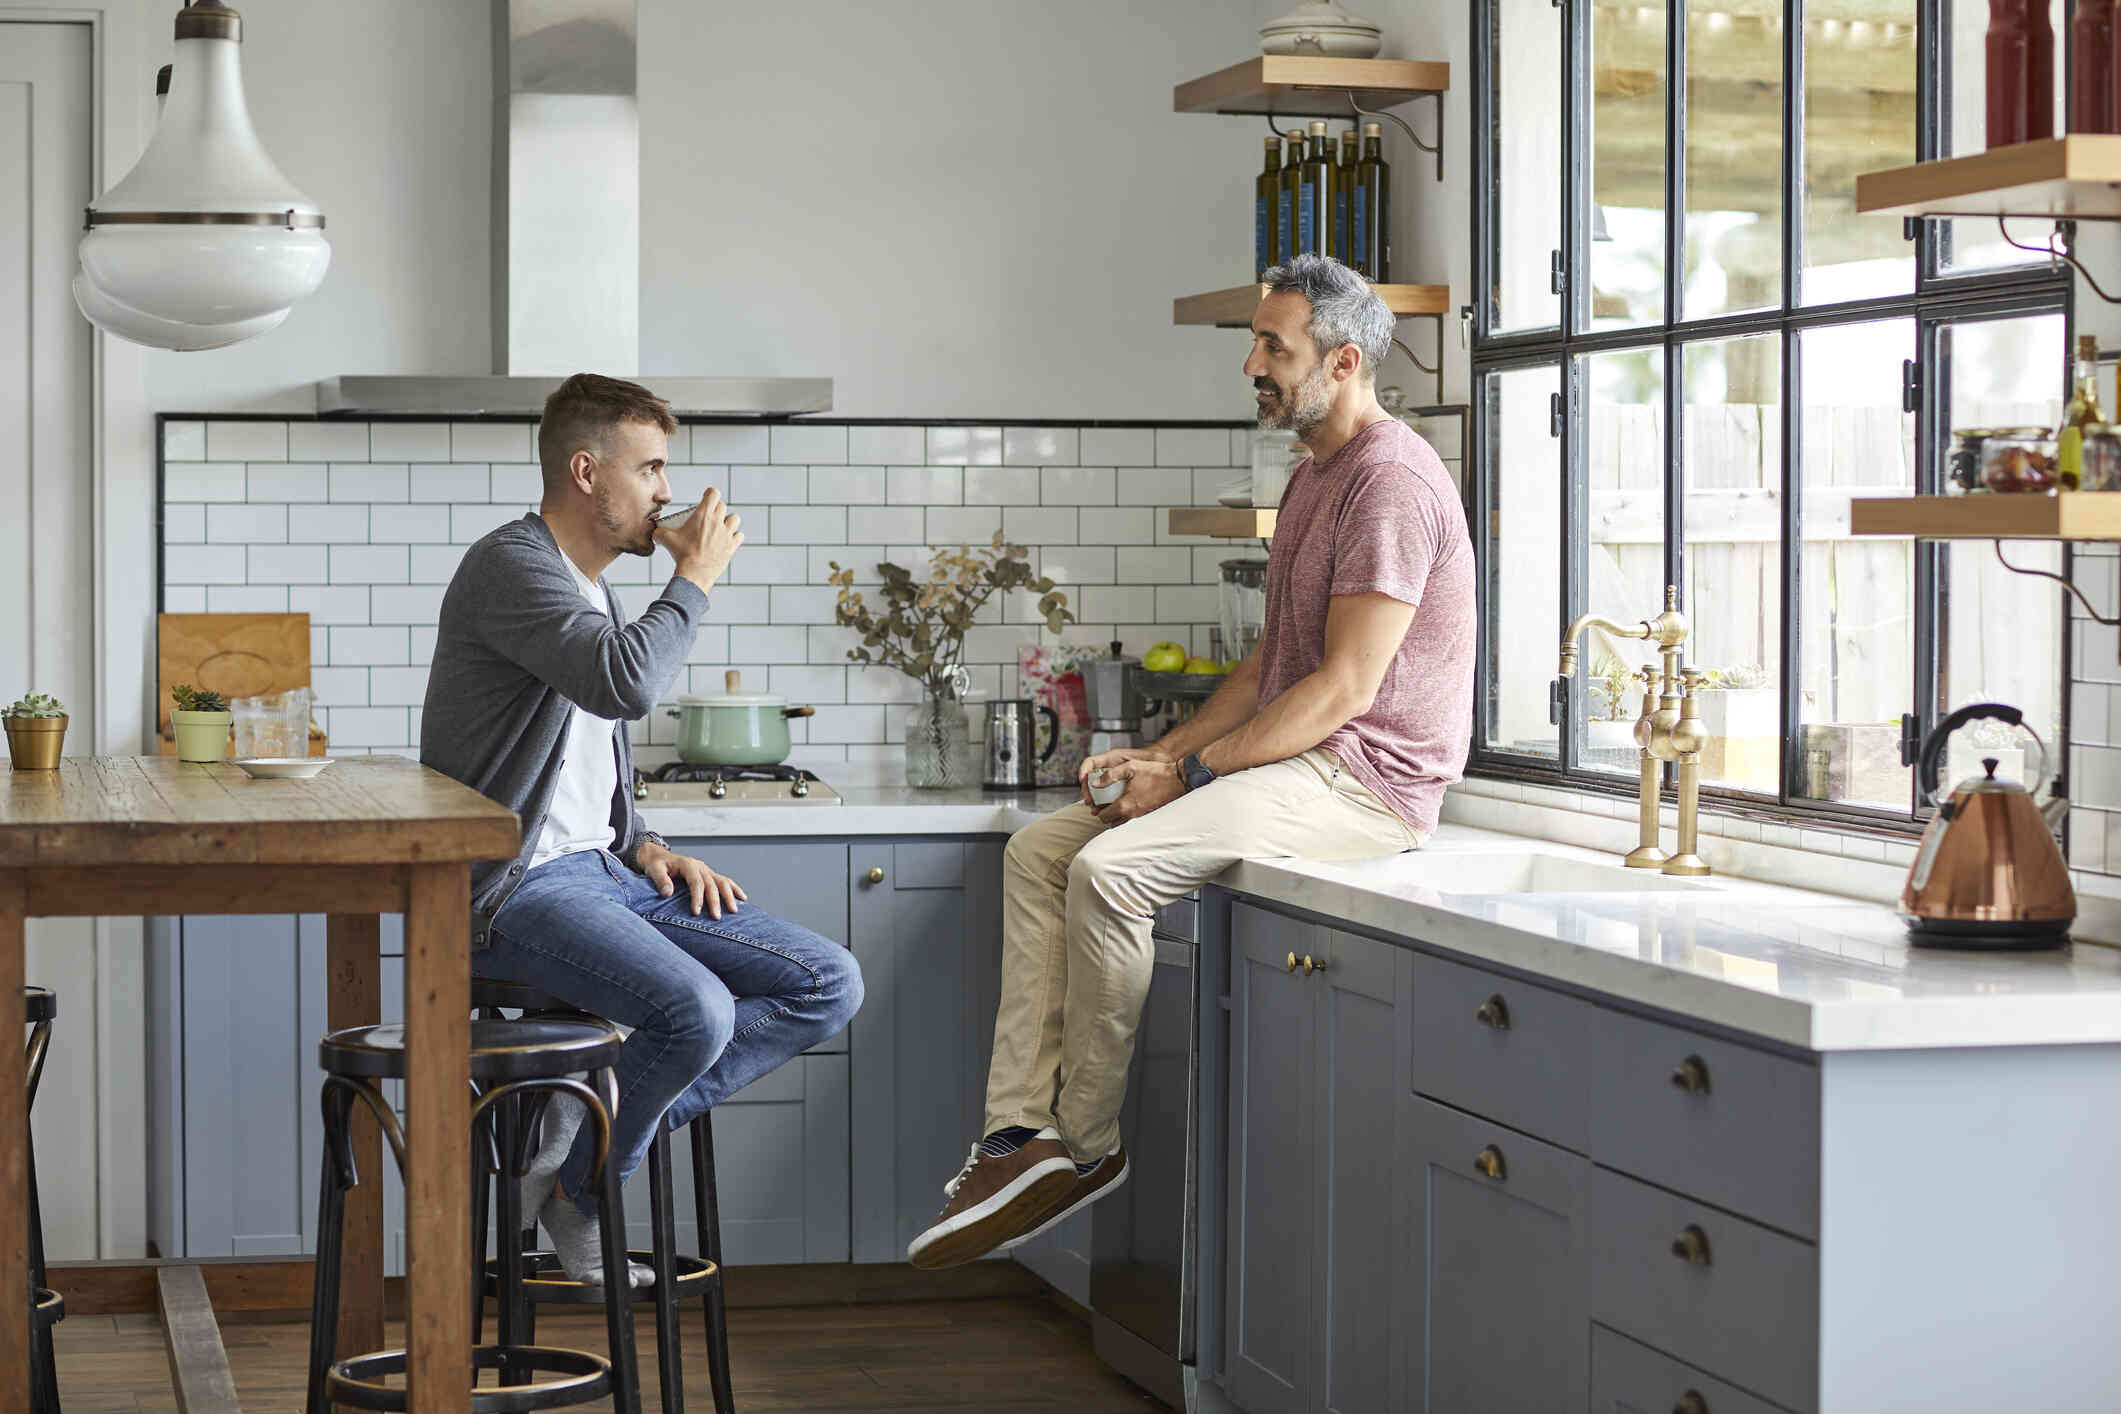 A man sits on the kitchen counter with a cup of coffee while his male partner sits across from him on a stool as they talk.